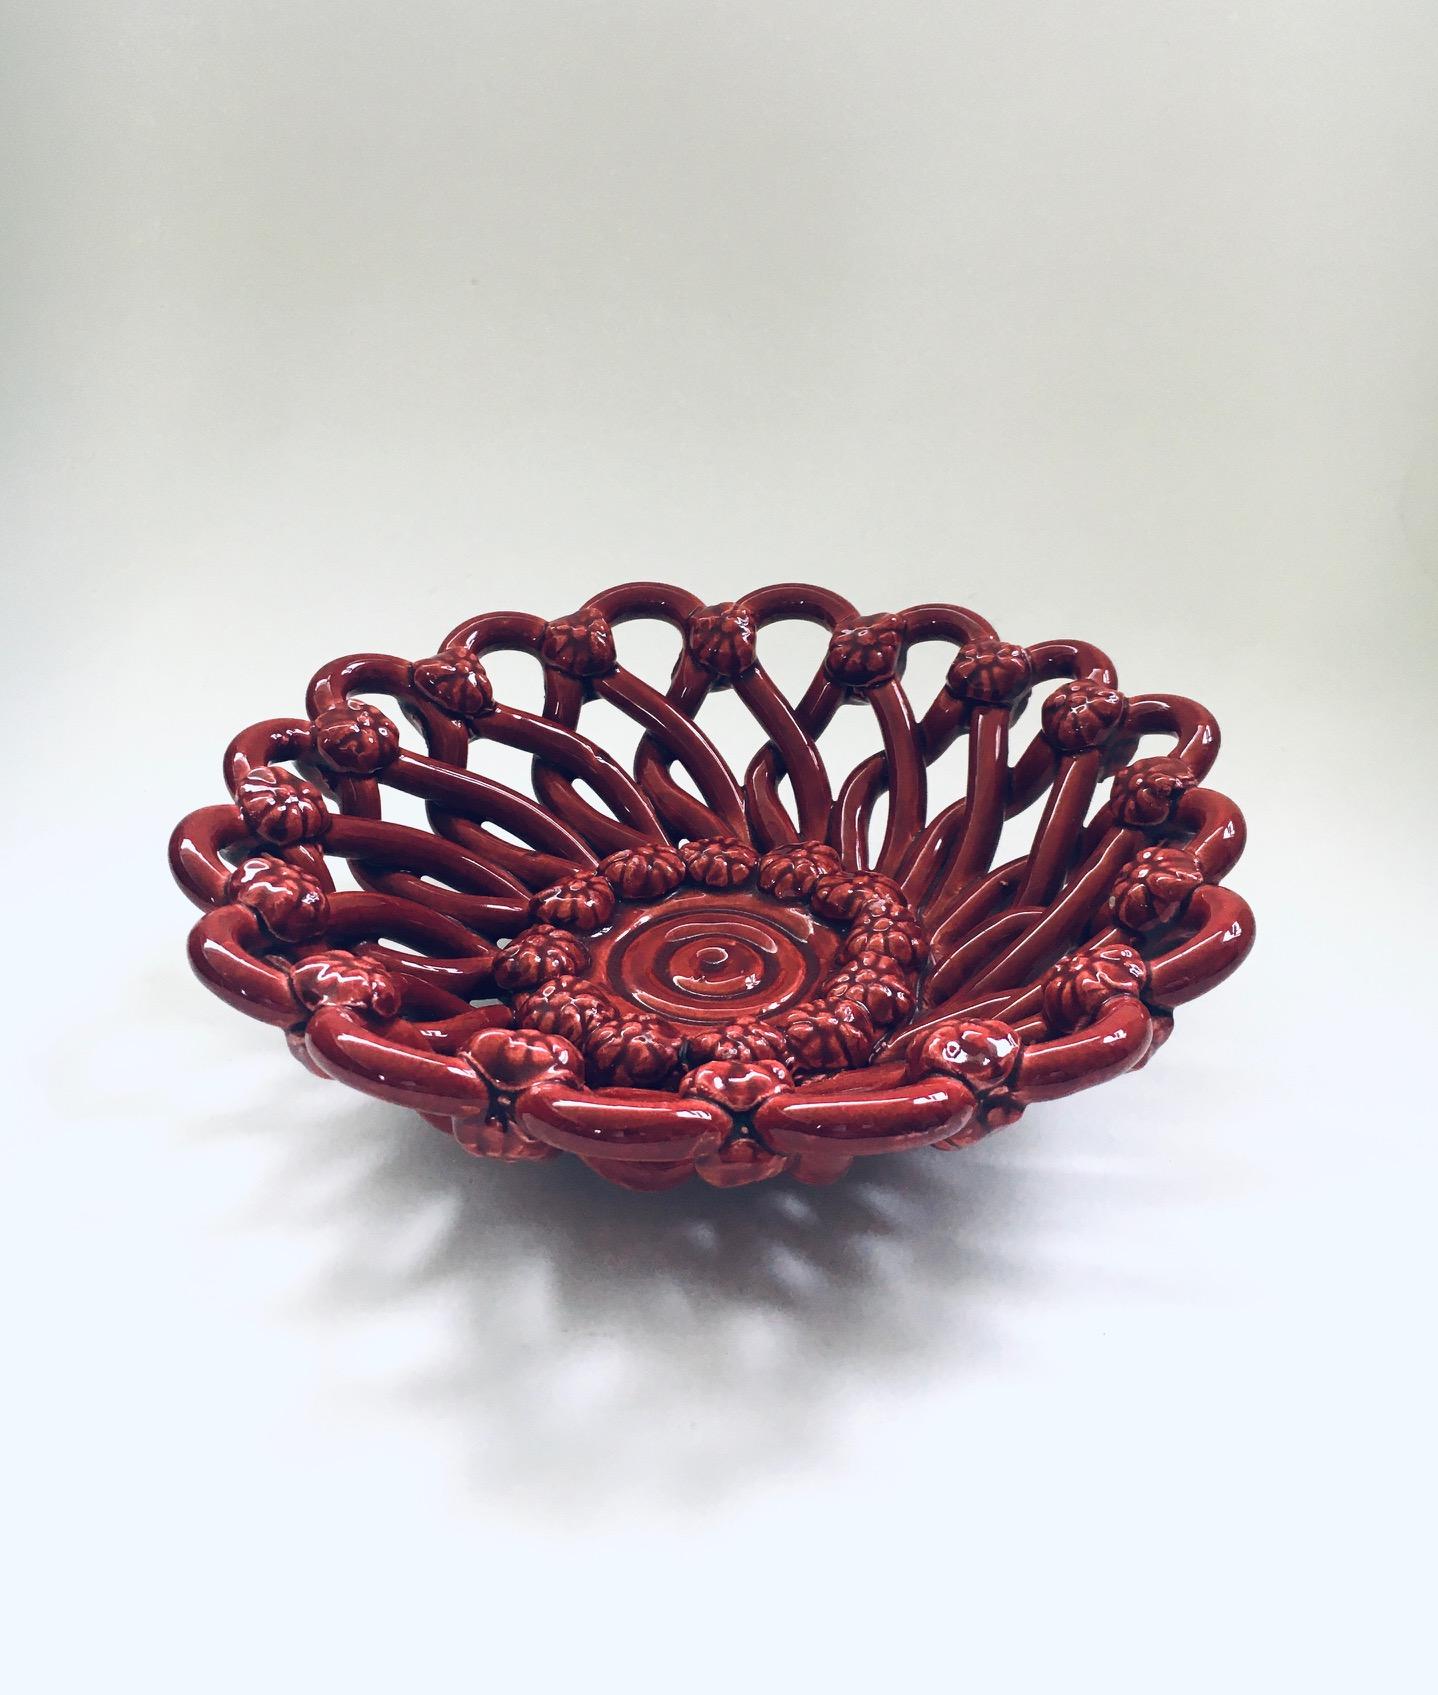 Vintage Midcentury Art Ceramics Basketweave Flower Bowl. Made in France, Vallauris, 1950's period. Stamped on the bottom. Bordeaux red color glazed braided woven ceramic bowl. Comes in very good condition. Measures 7cm x 21,5cm x 21,5cm.